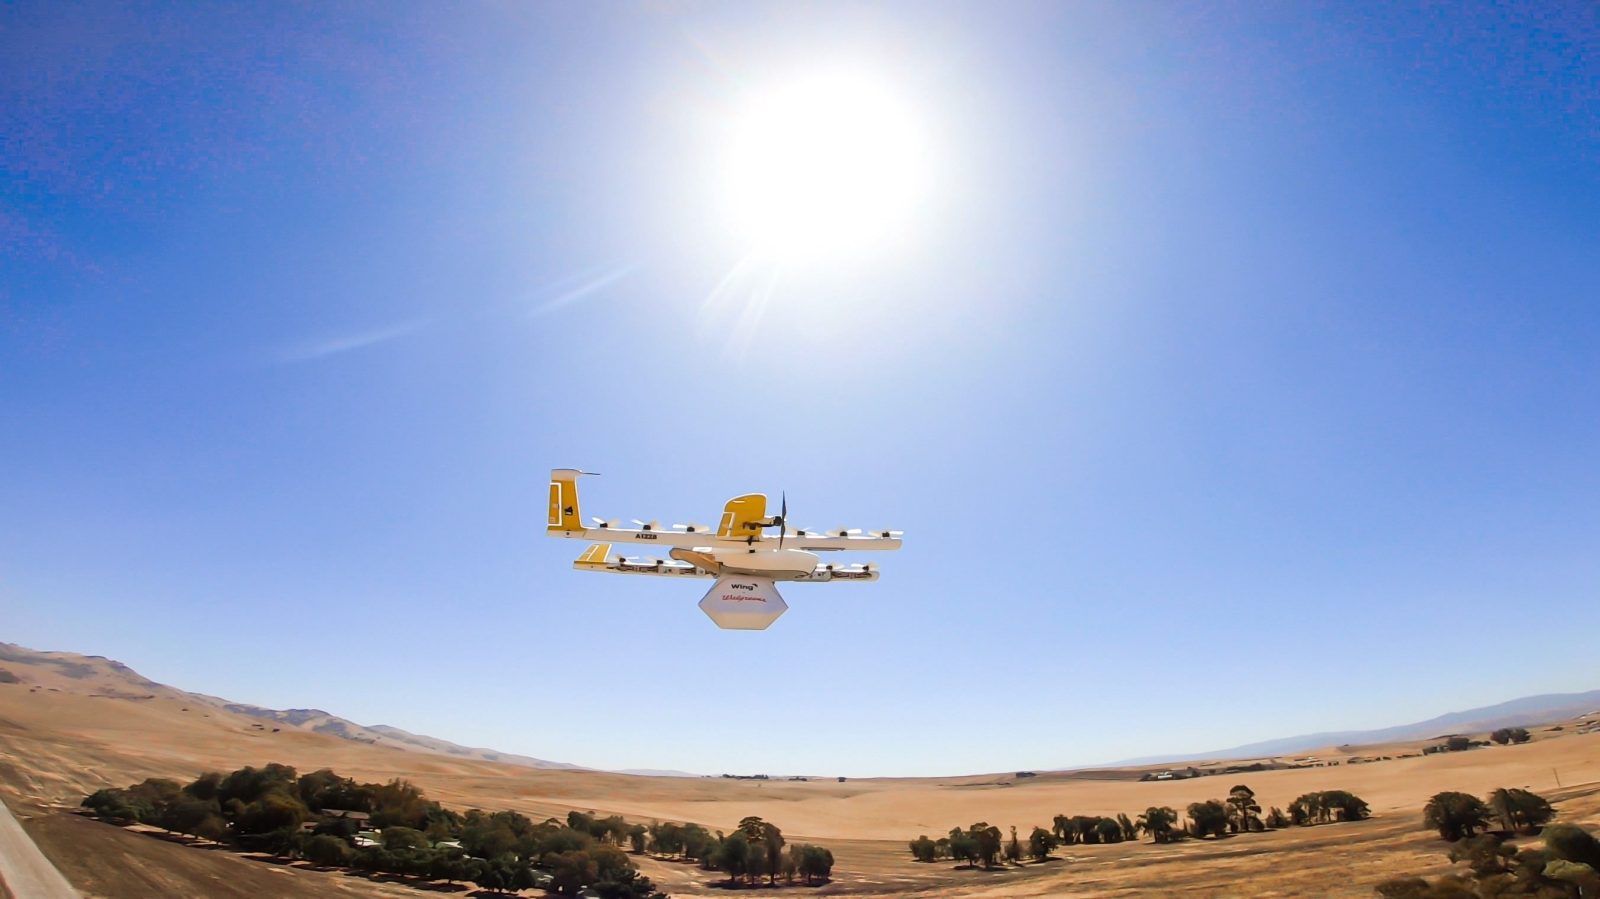 Wing-Aviation-partners-with-FedEx-and-Walgreens-to-deliver-packages-by-drone.jpg